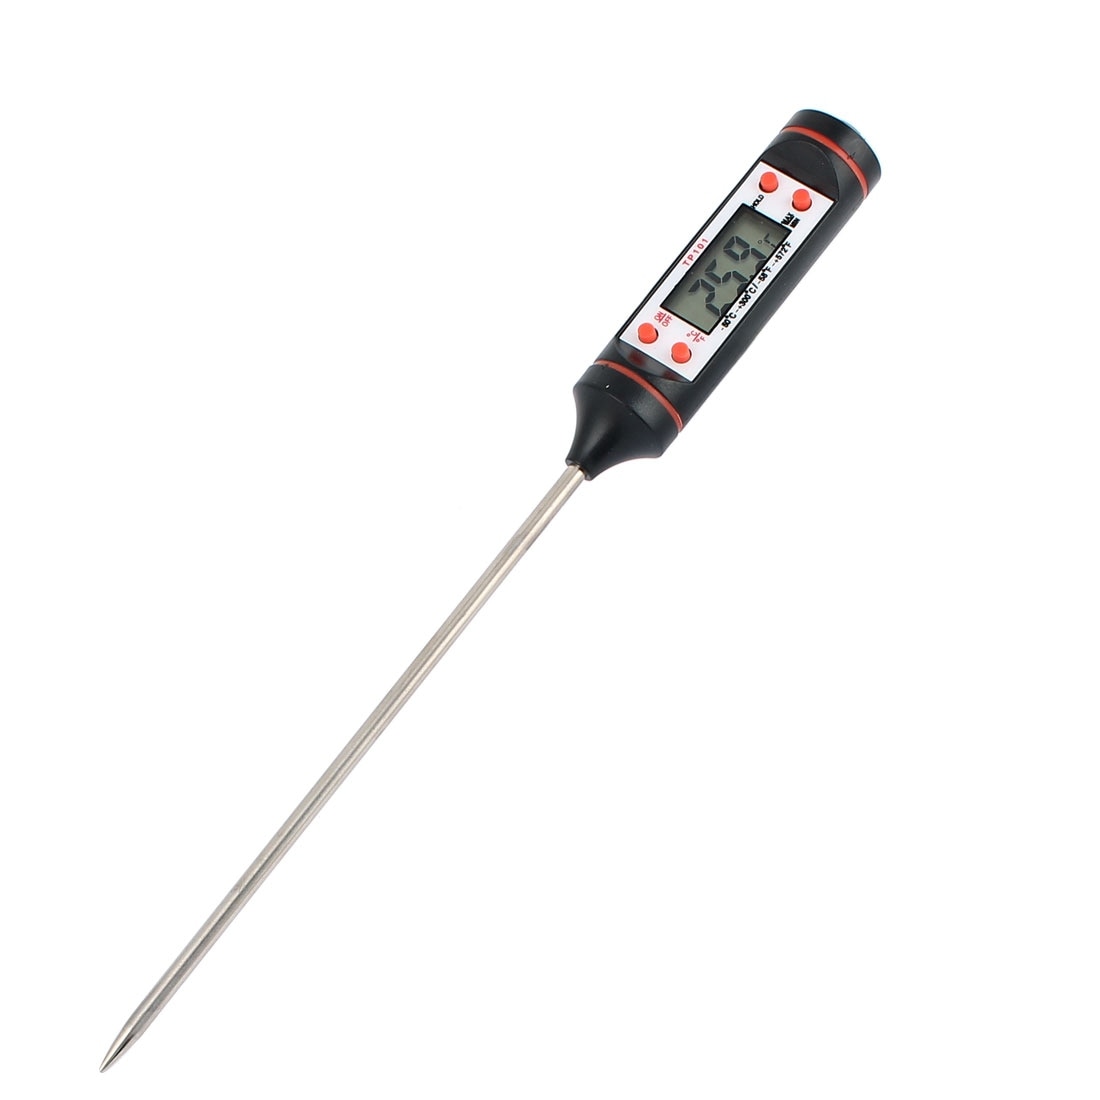 https://ak1.ostkcdn.com/images/products/is/images/direct/117fdf185960995841fbb69c129e213758939c00/Digital-Probe-Thermometer-Food-Temperature-Sensor-for-Cooking-Baking-Meat.jpg